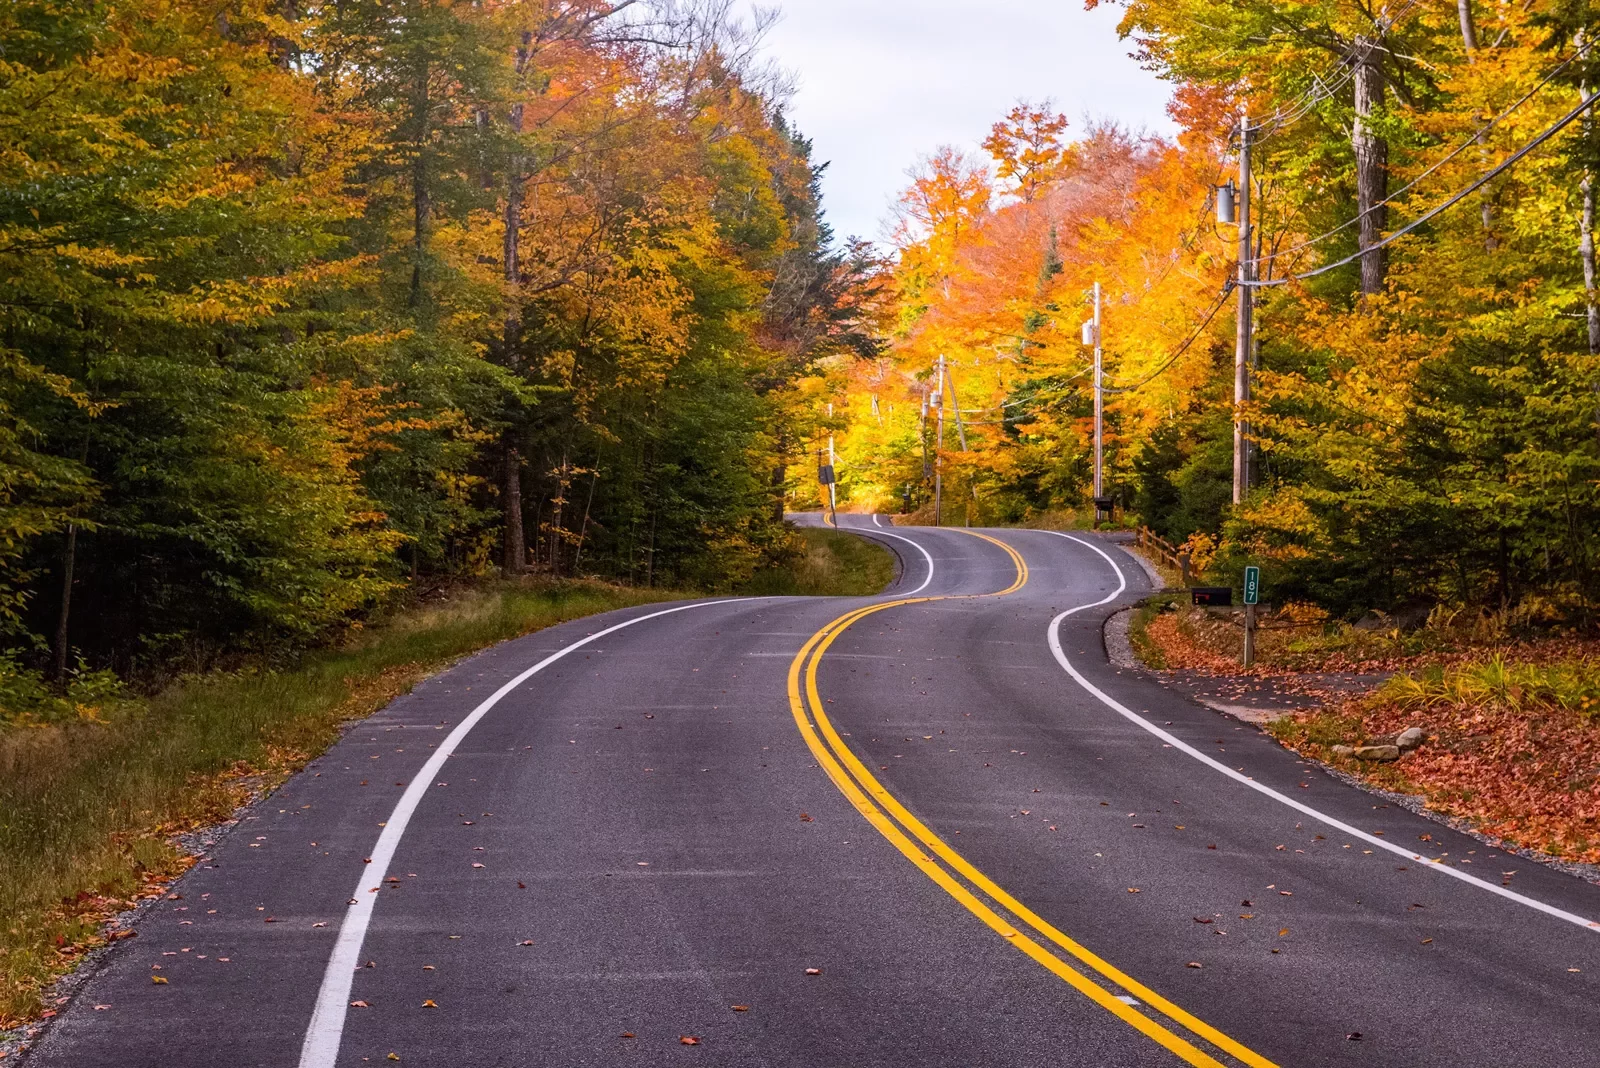 Winding road lined with fall trees in upstate New York.